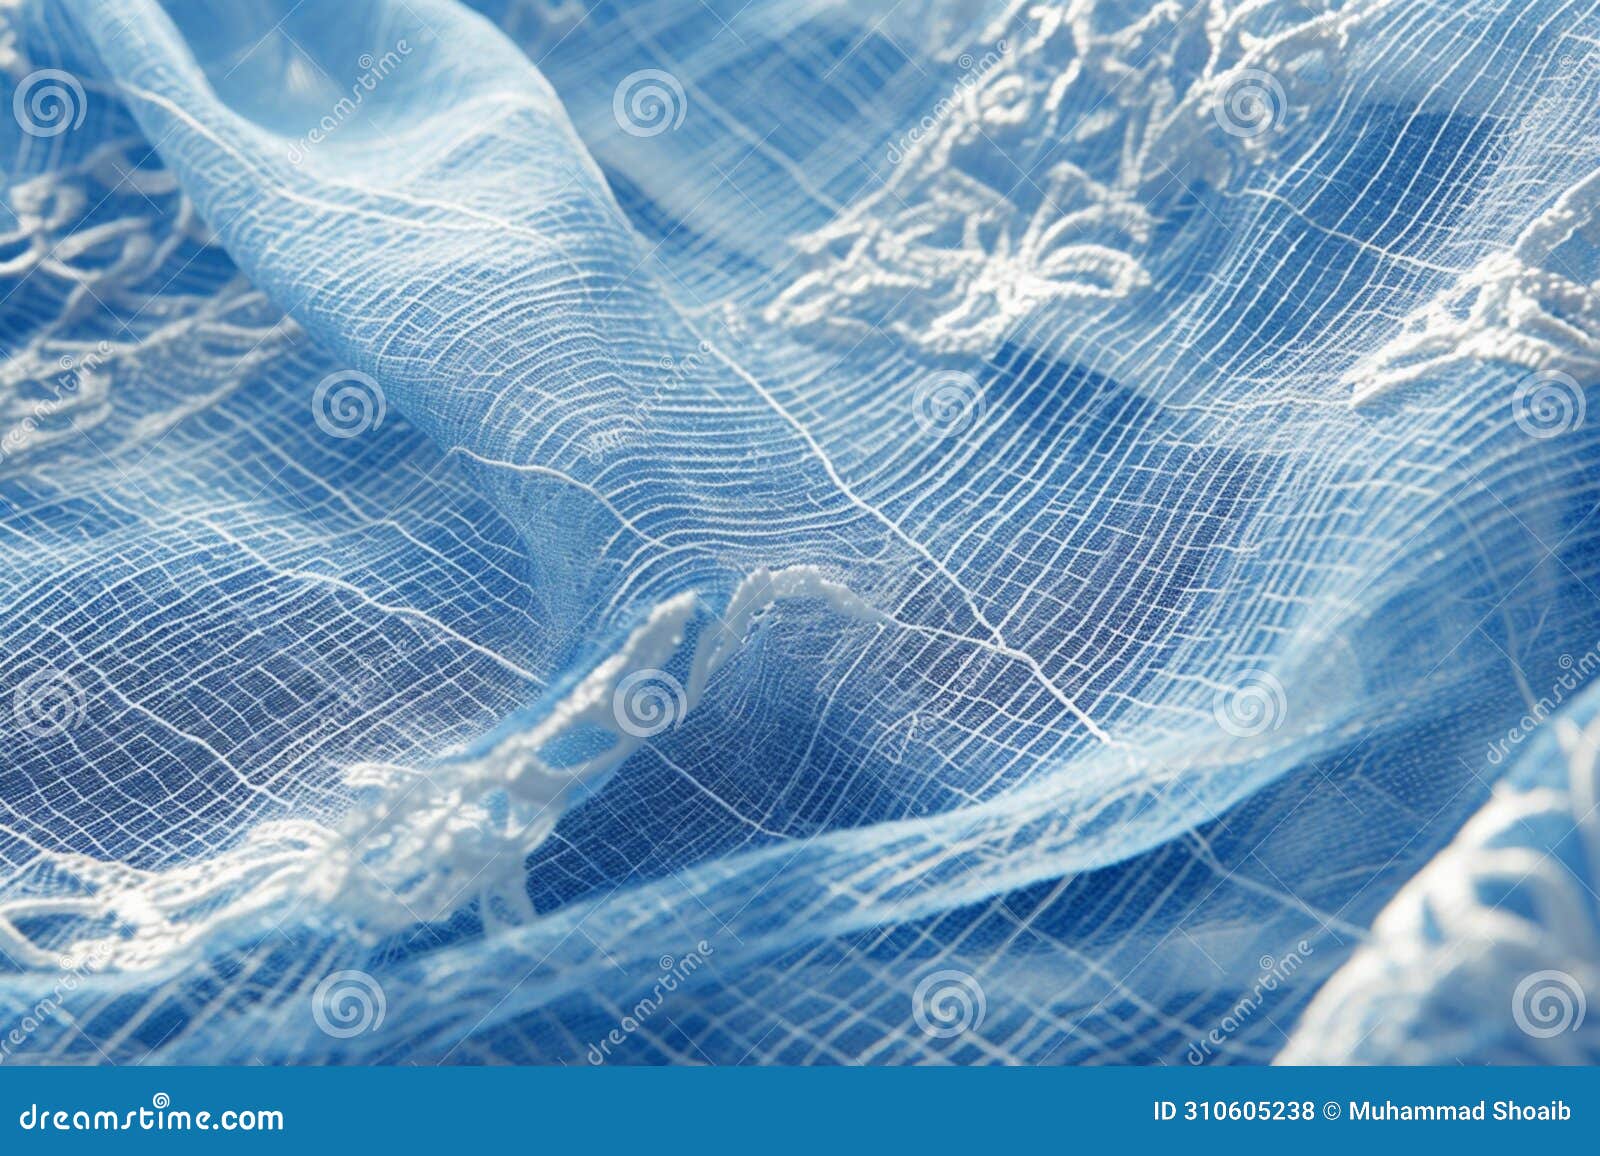 explore the texture of blue netting with delicate white adornments